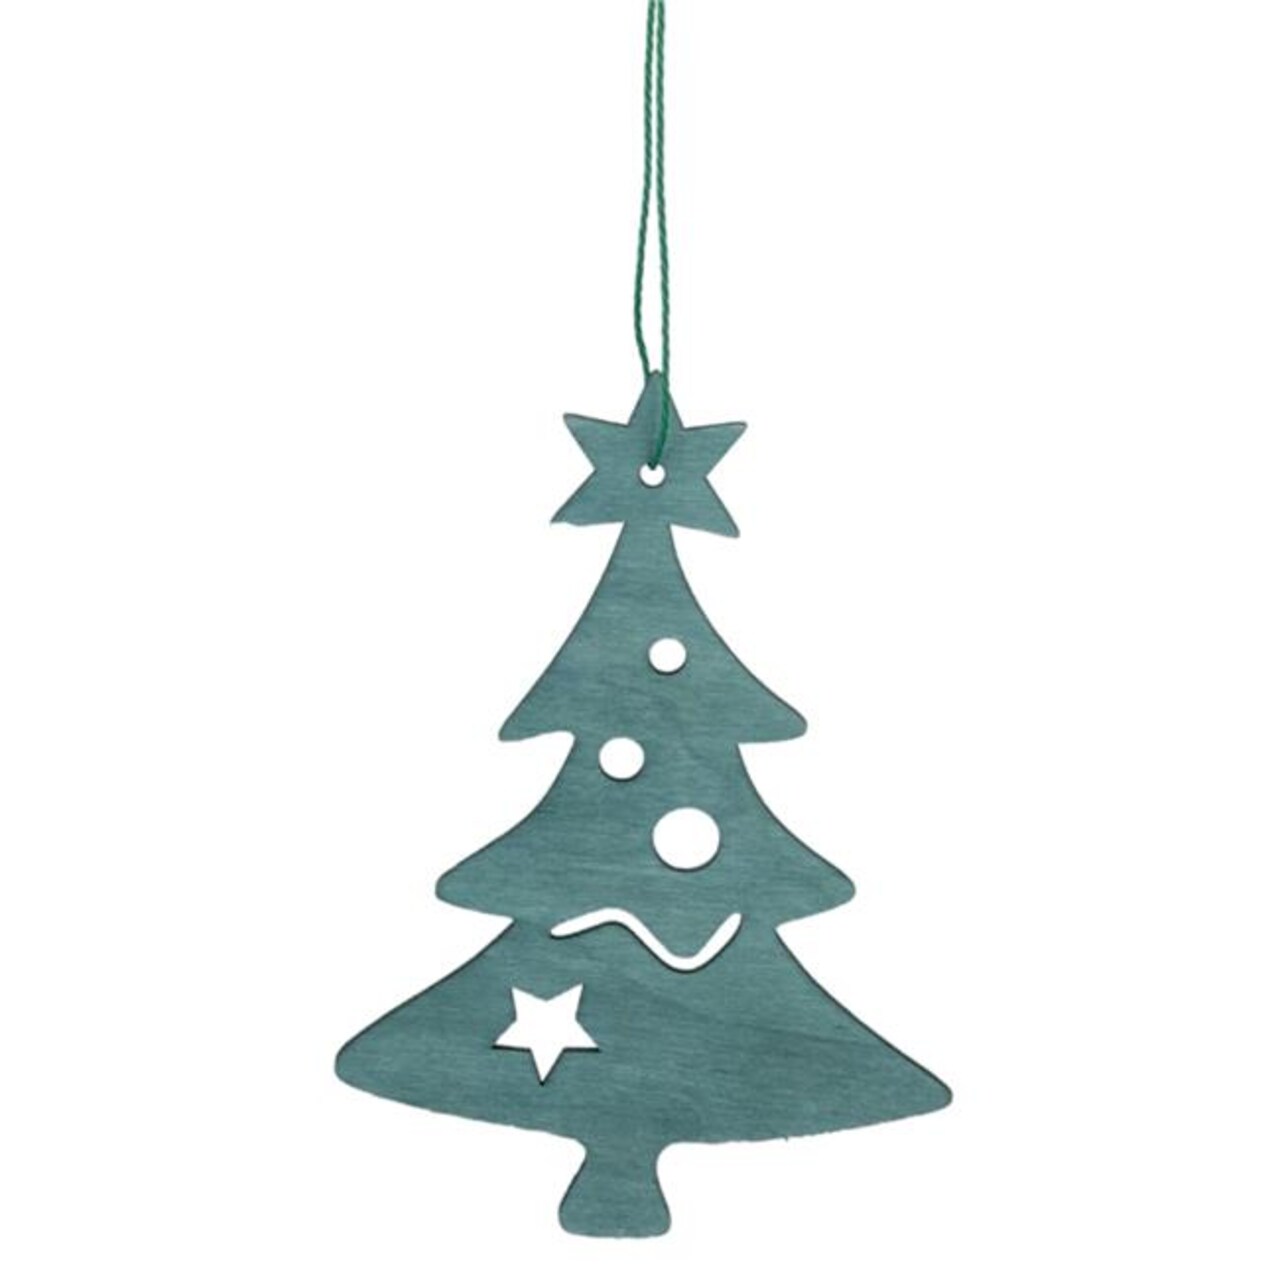 NorthLight 34314971 4.75 in. Wooden Cut Out Christmas Tree Ornament, Teal Green